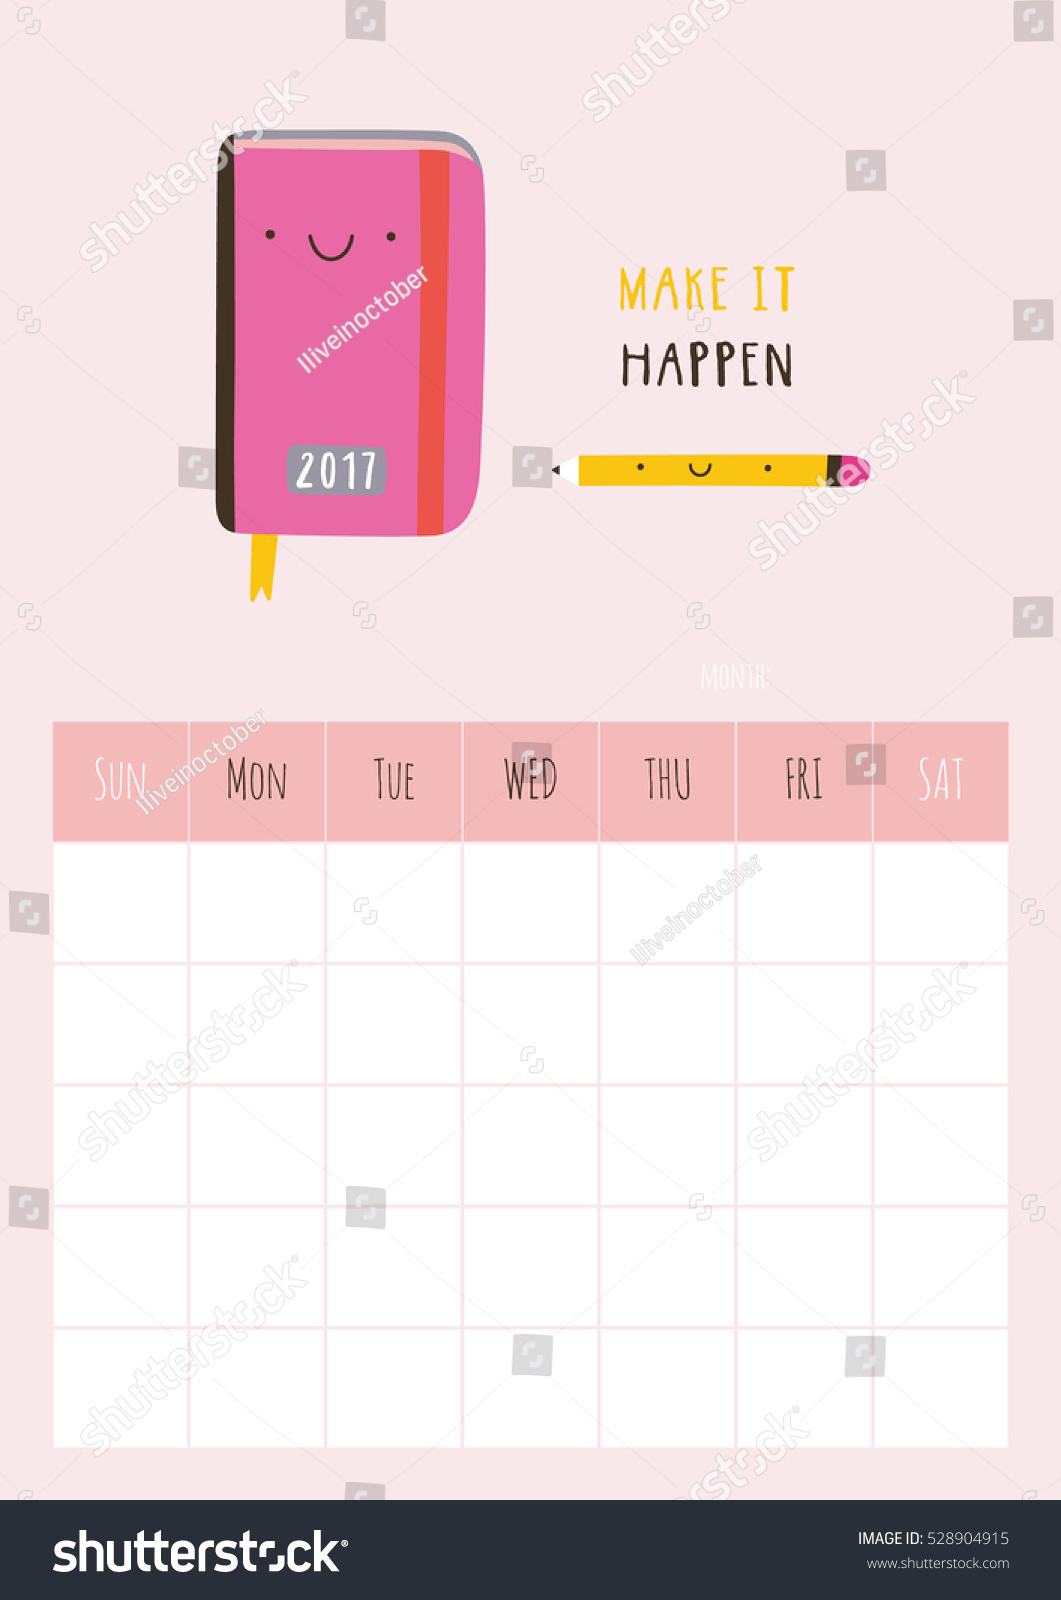 Monthly Blank Calendar Template from image.shutterstock.com